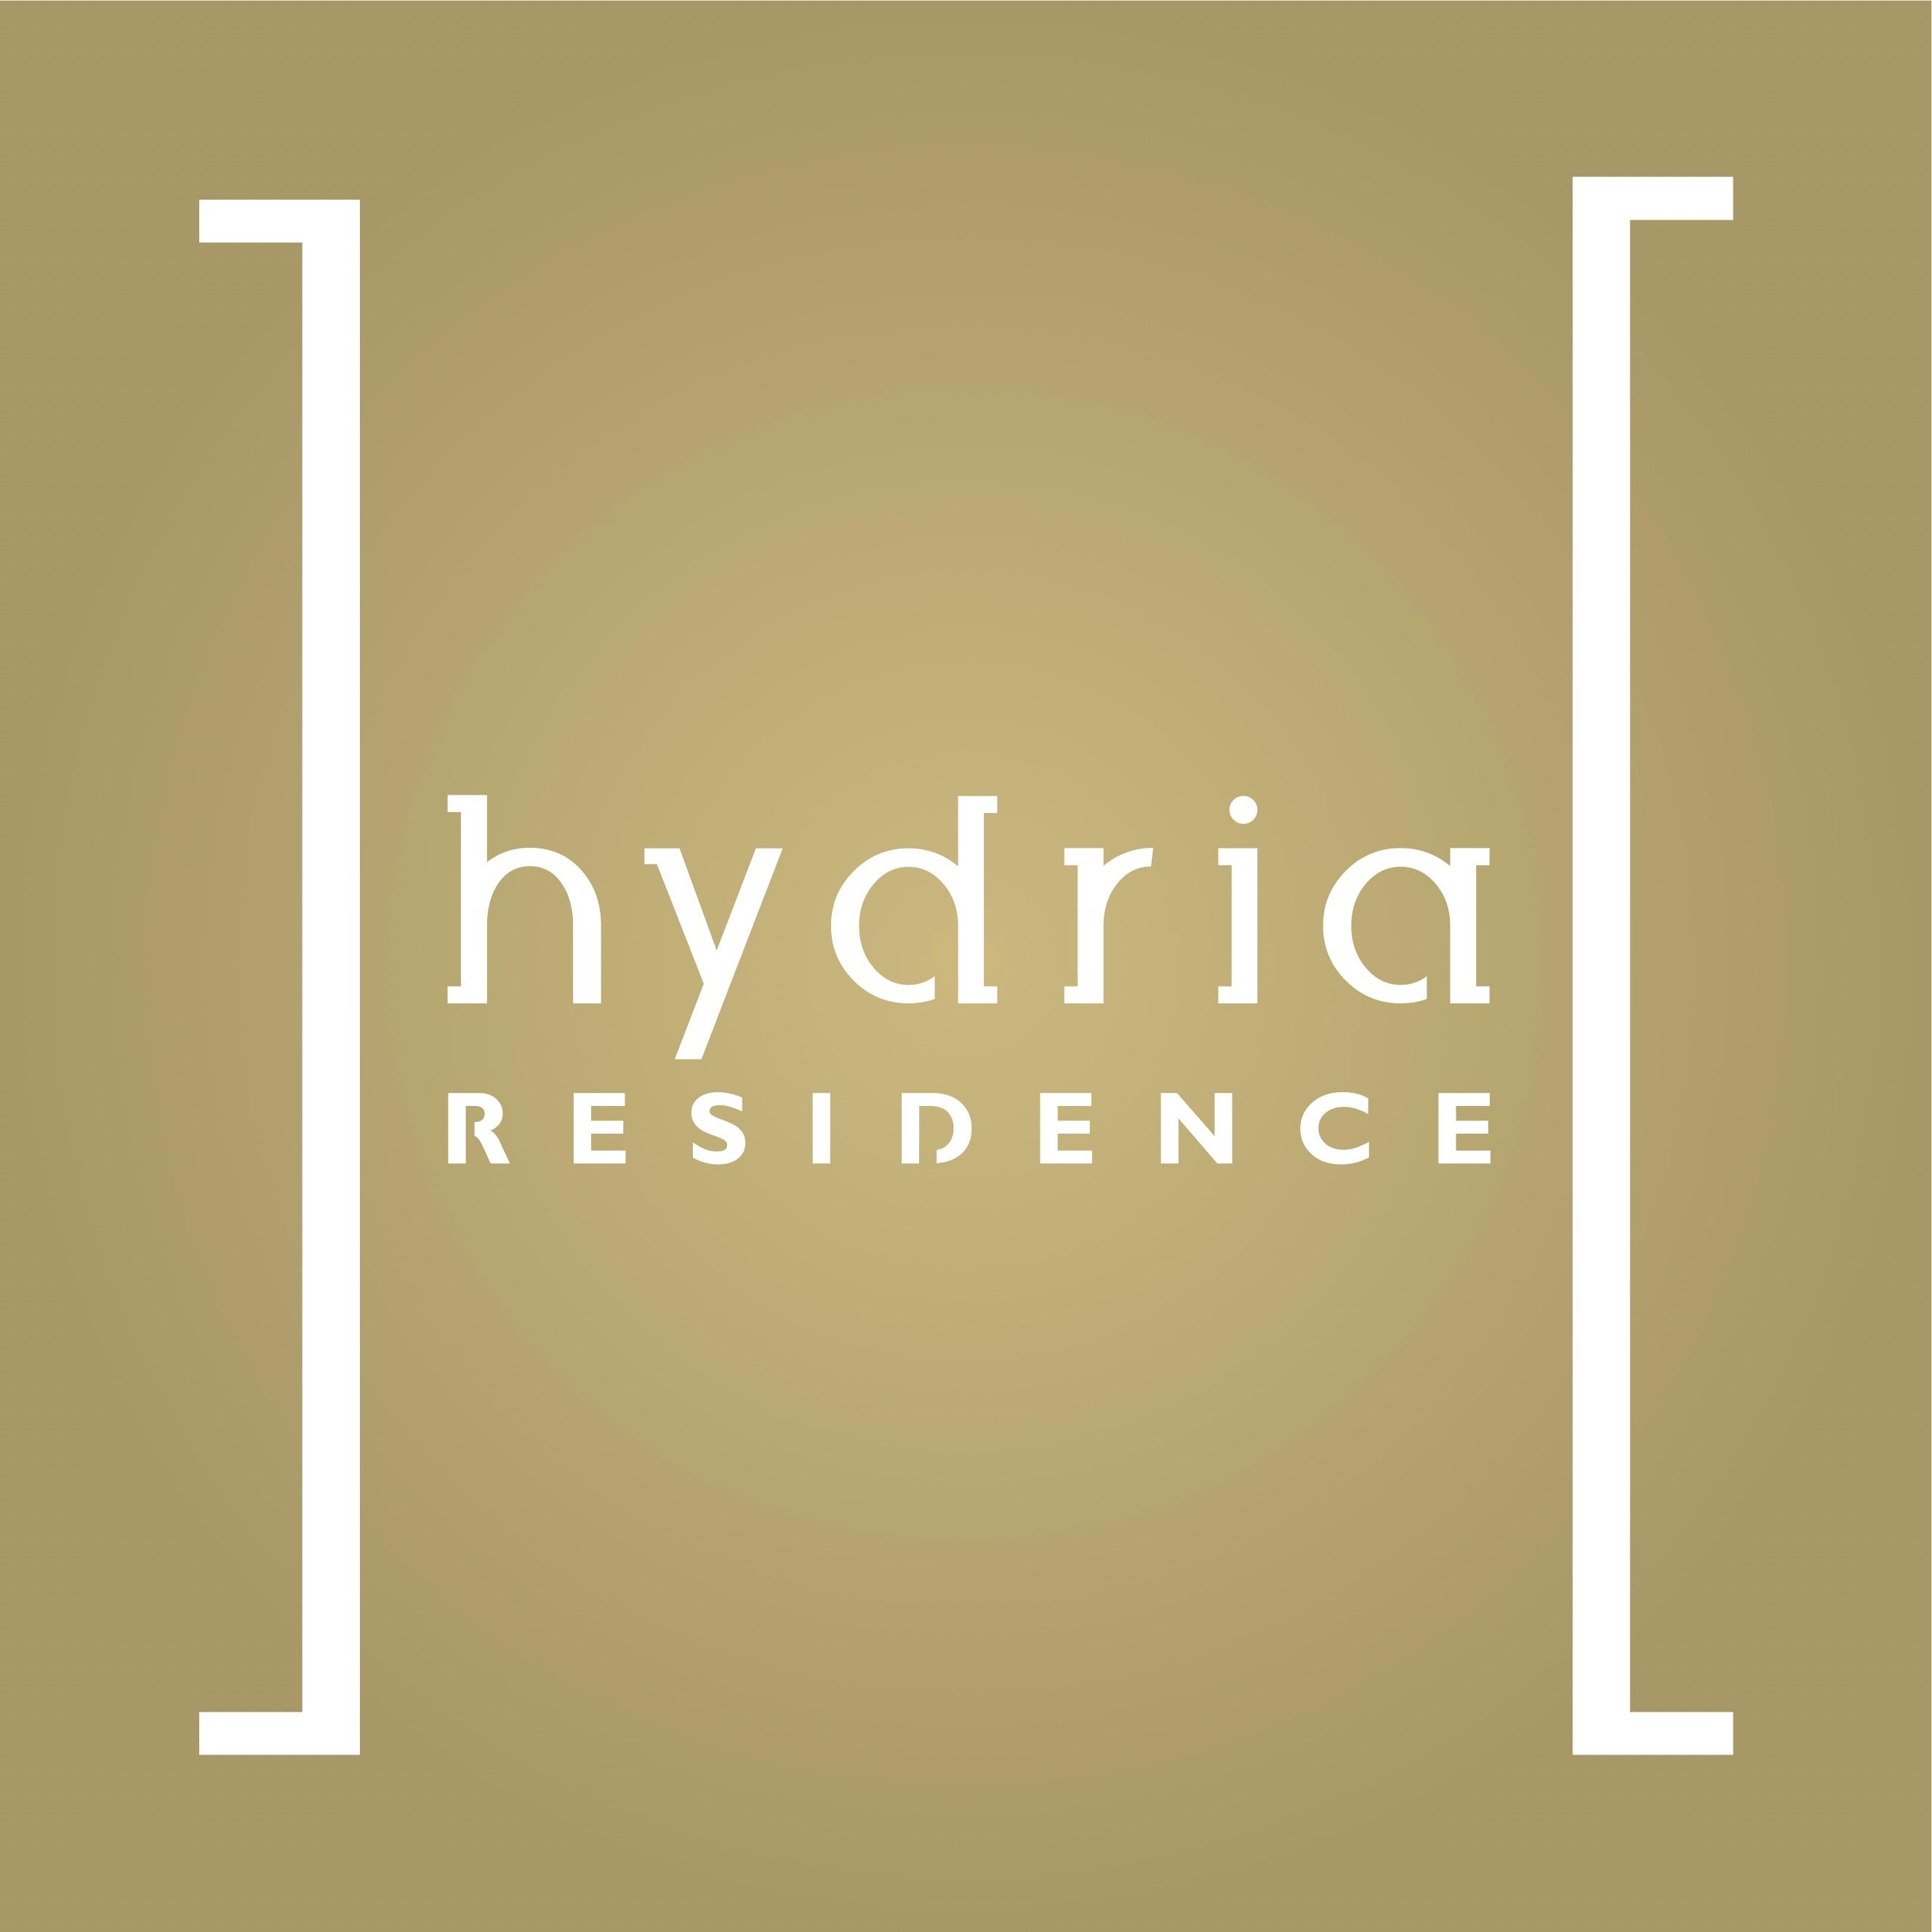 Hydria Residence